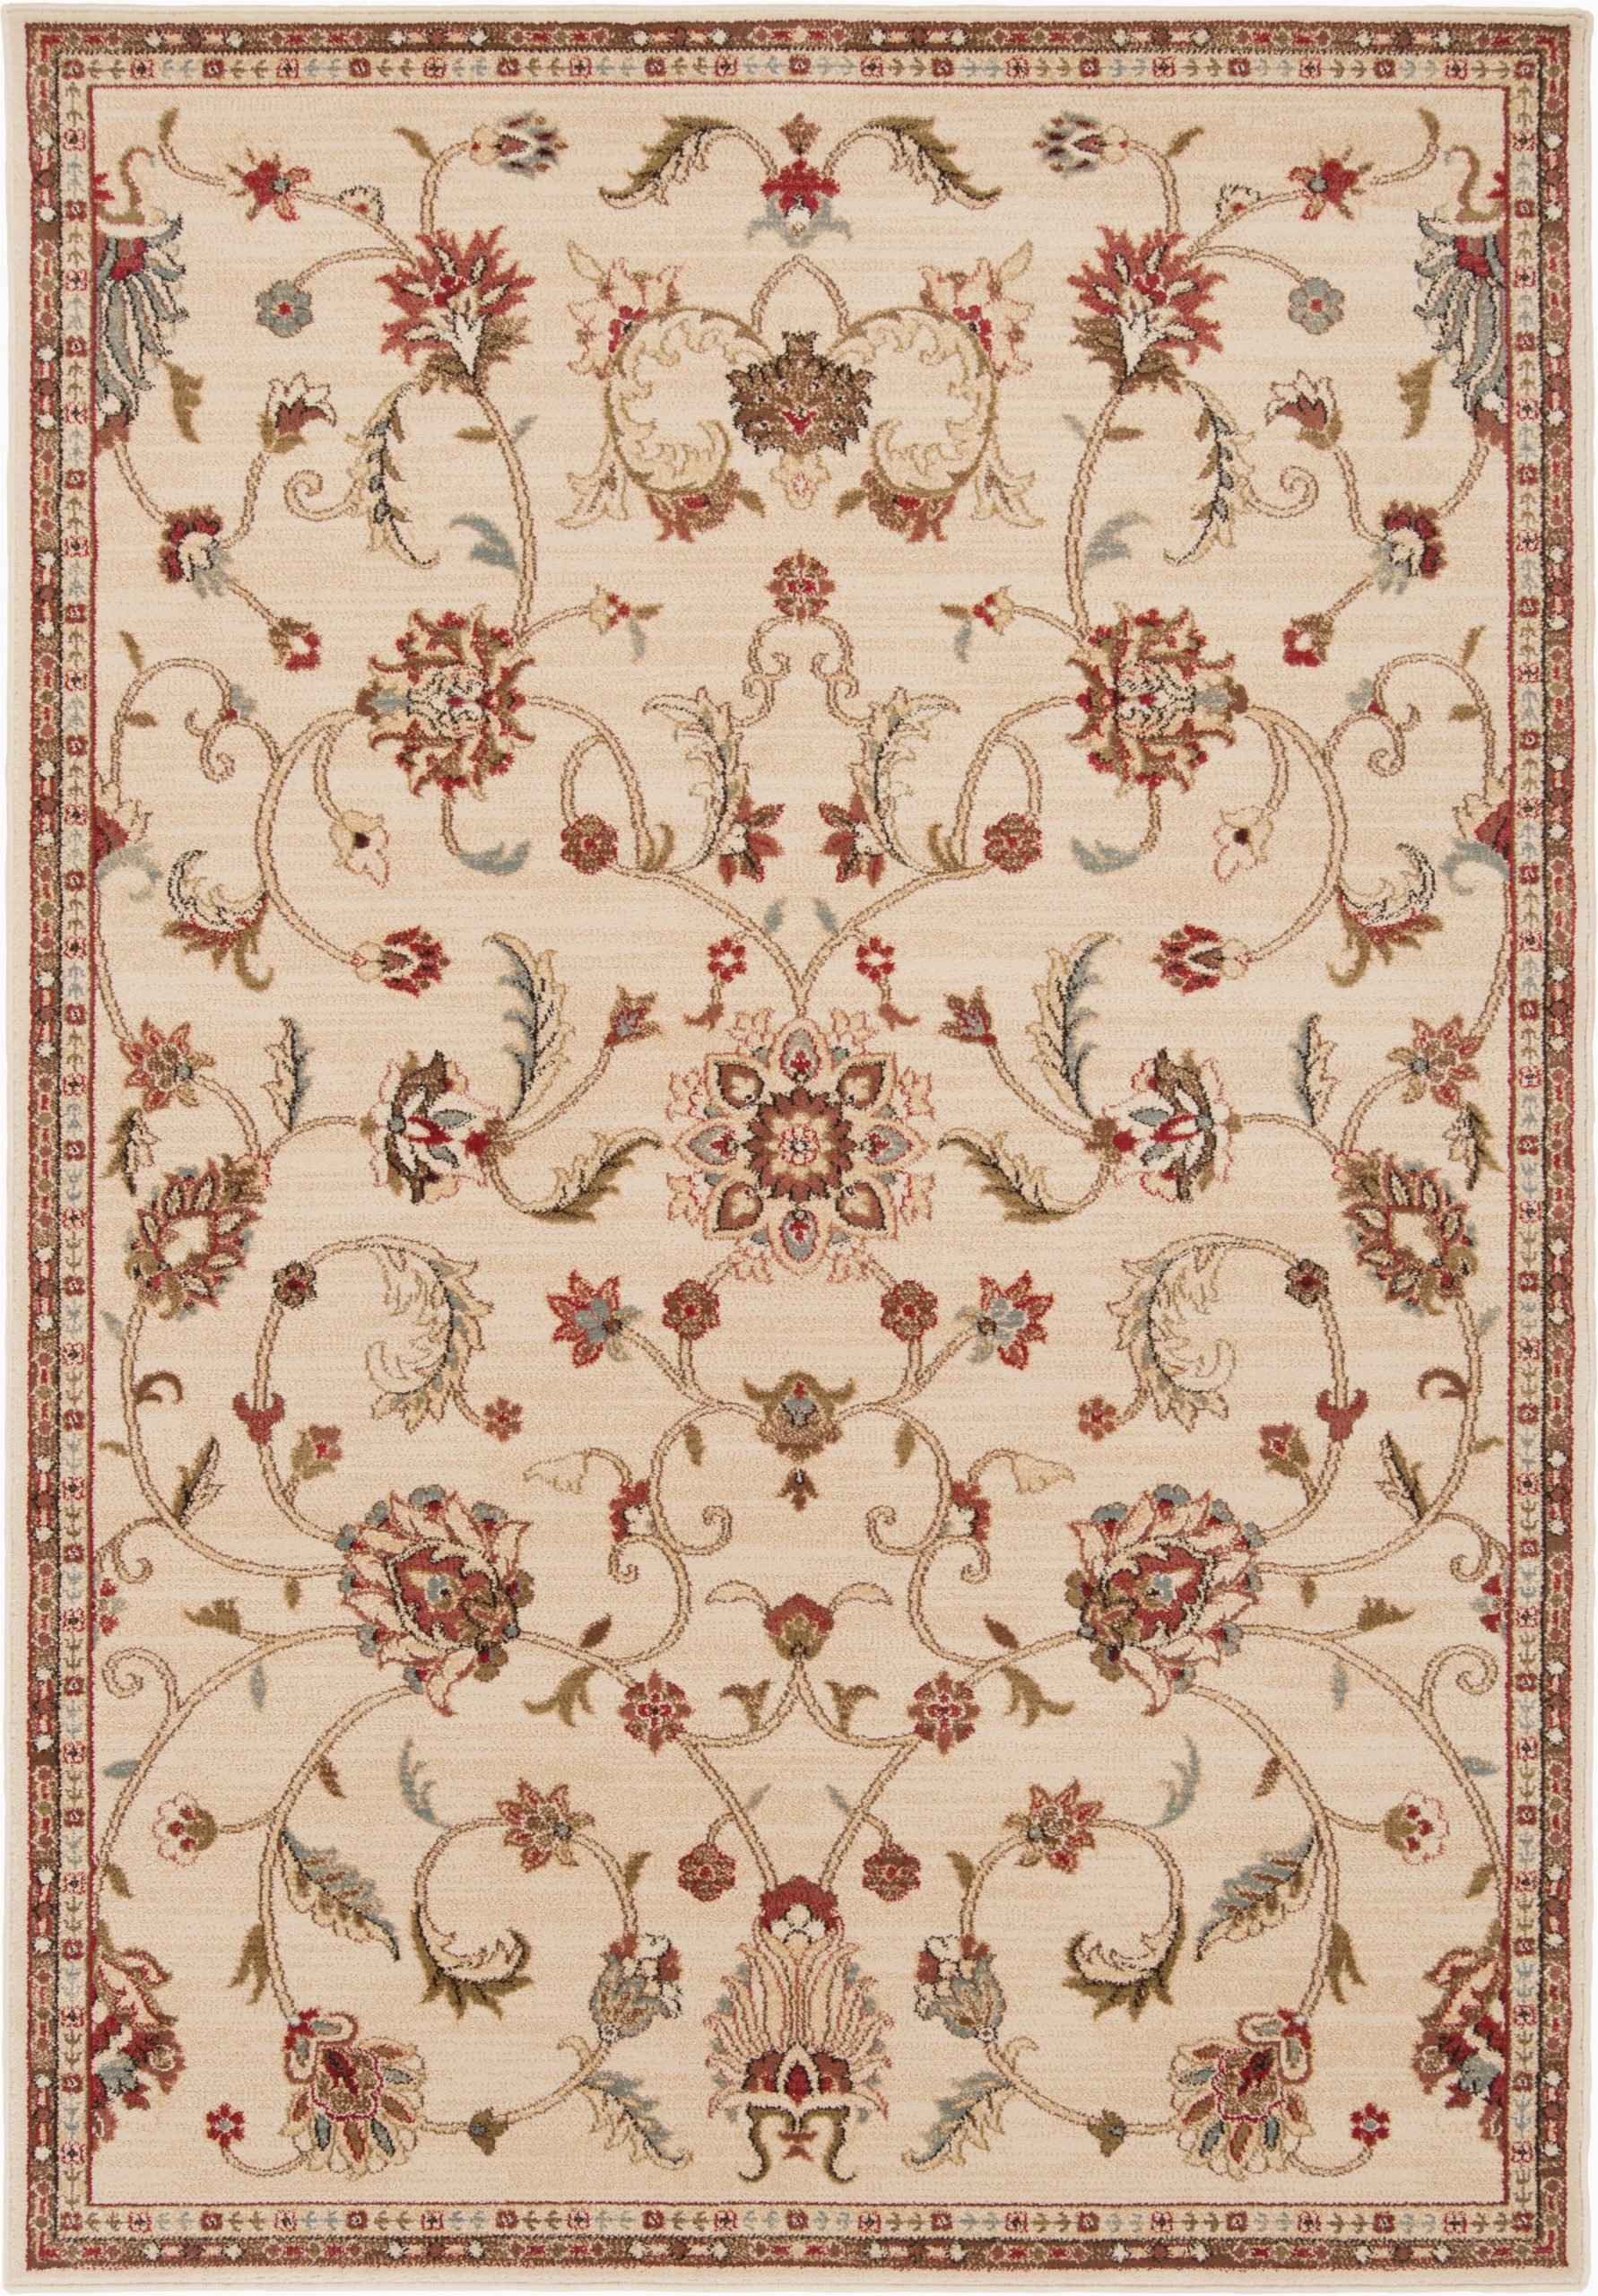 Large area Rugs 12 X 14 10 X 14 area Rugs You Ll Love In 2020